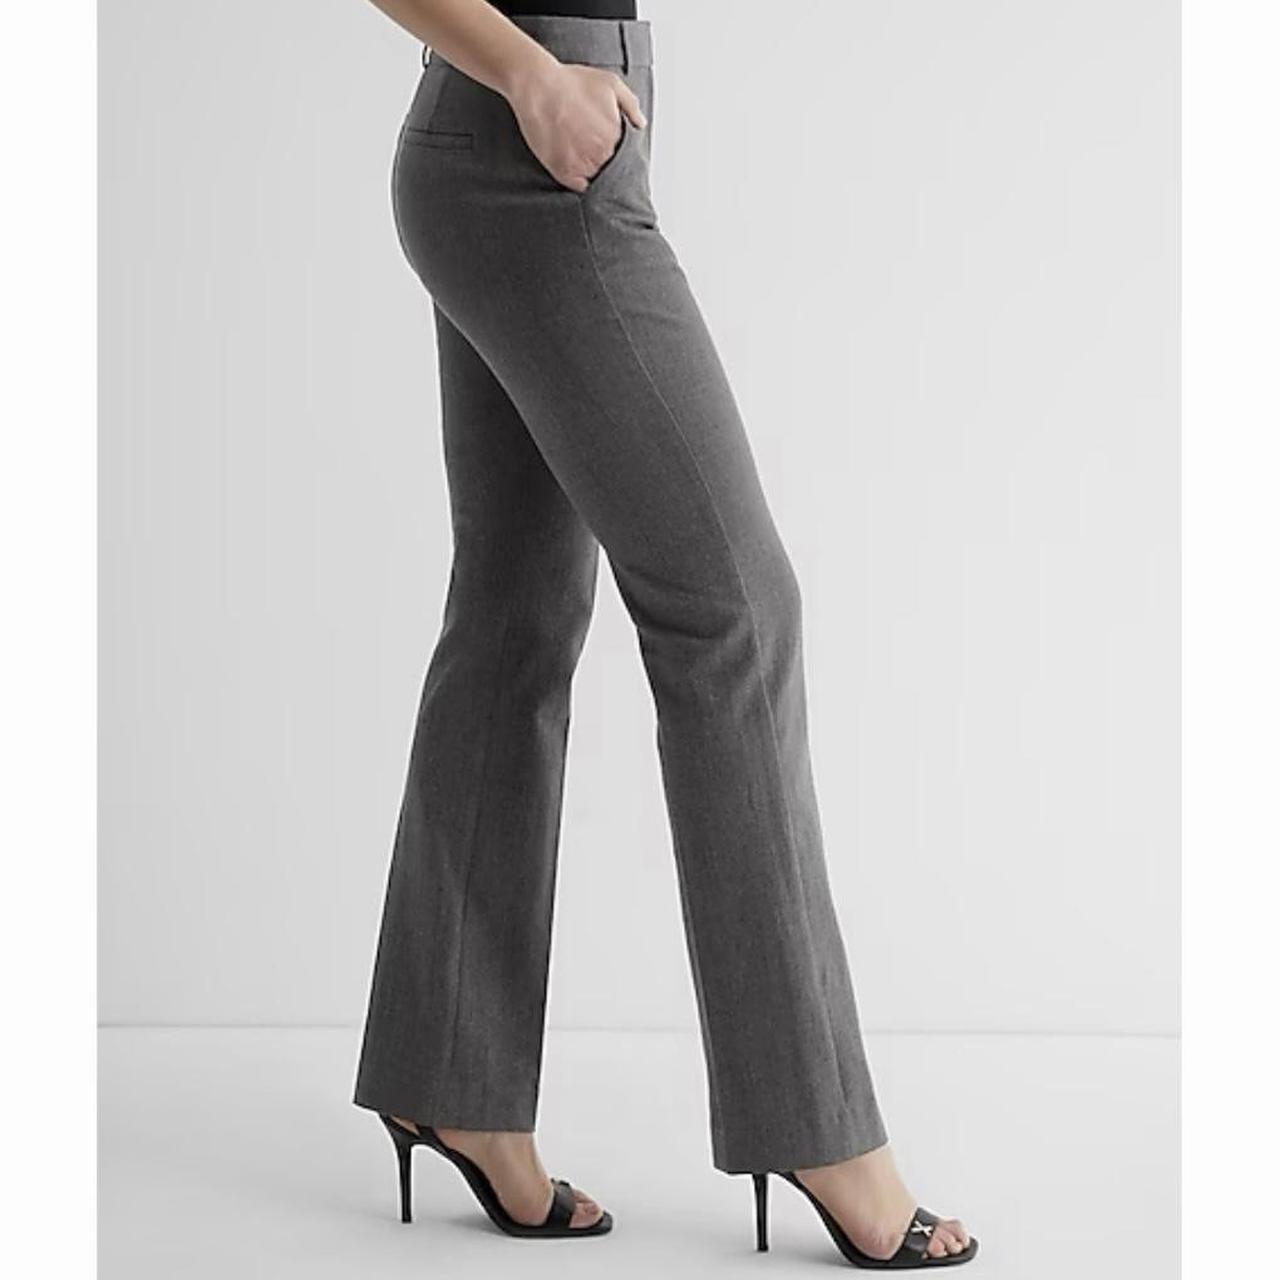 ILT - Pants LADIES - Grey - Academic Outfitters - Fortworth